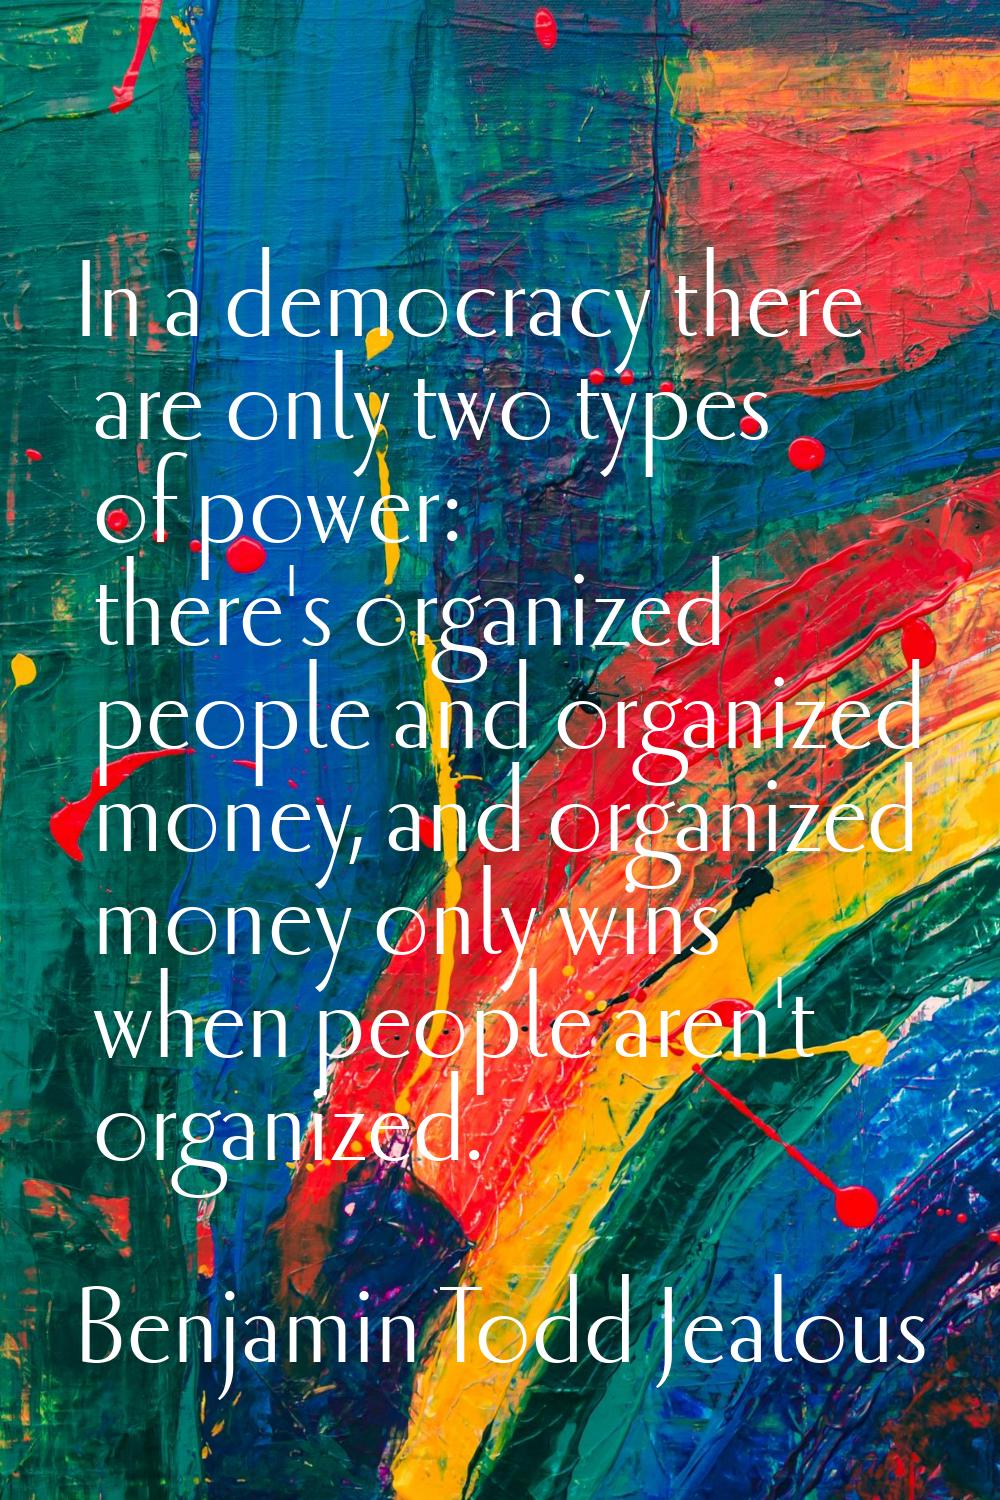 In a democracy there are only two types of power: there's organized people and organized money, and